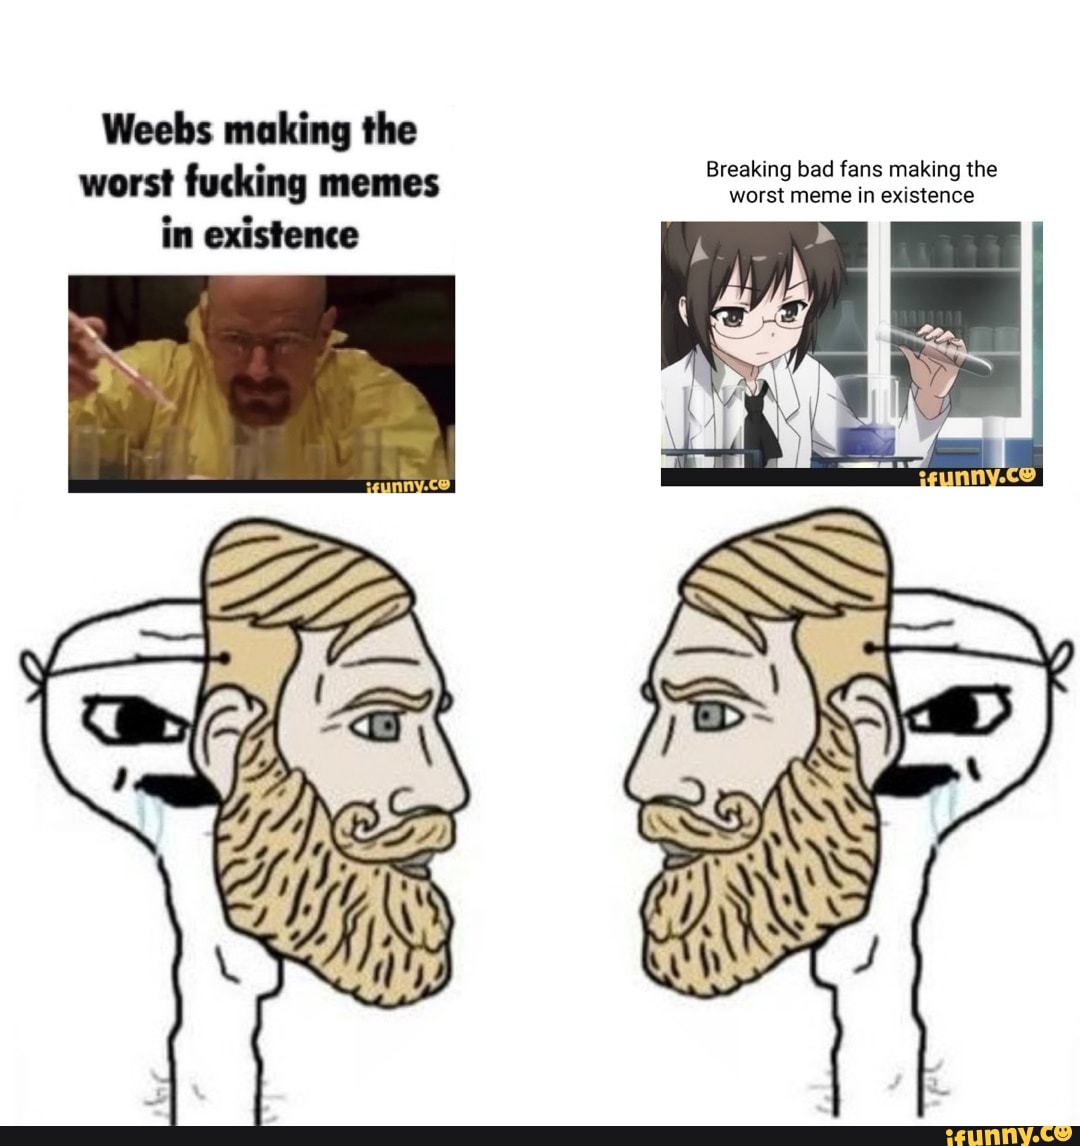 Weebs making the Breaking bad fans making the worst memi in existence worst  fucking memes worst meme in existence - iFunny Brazil